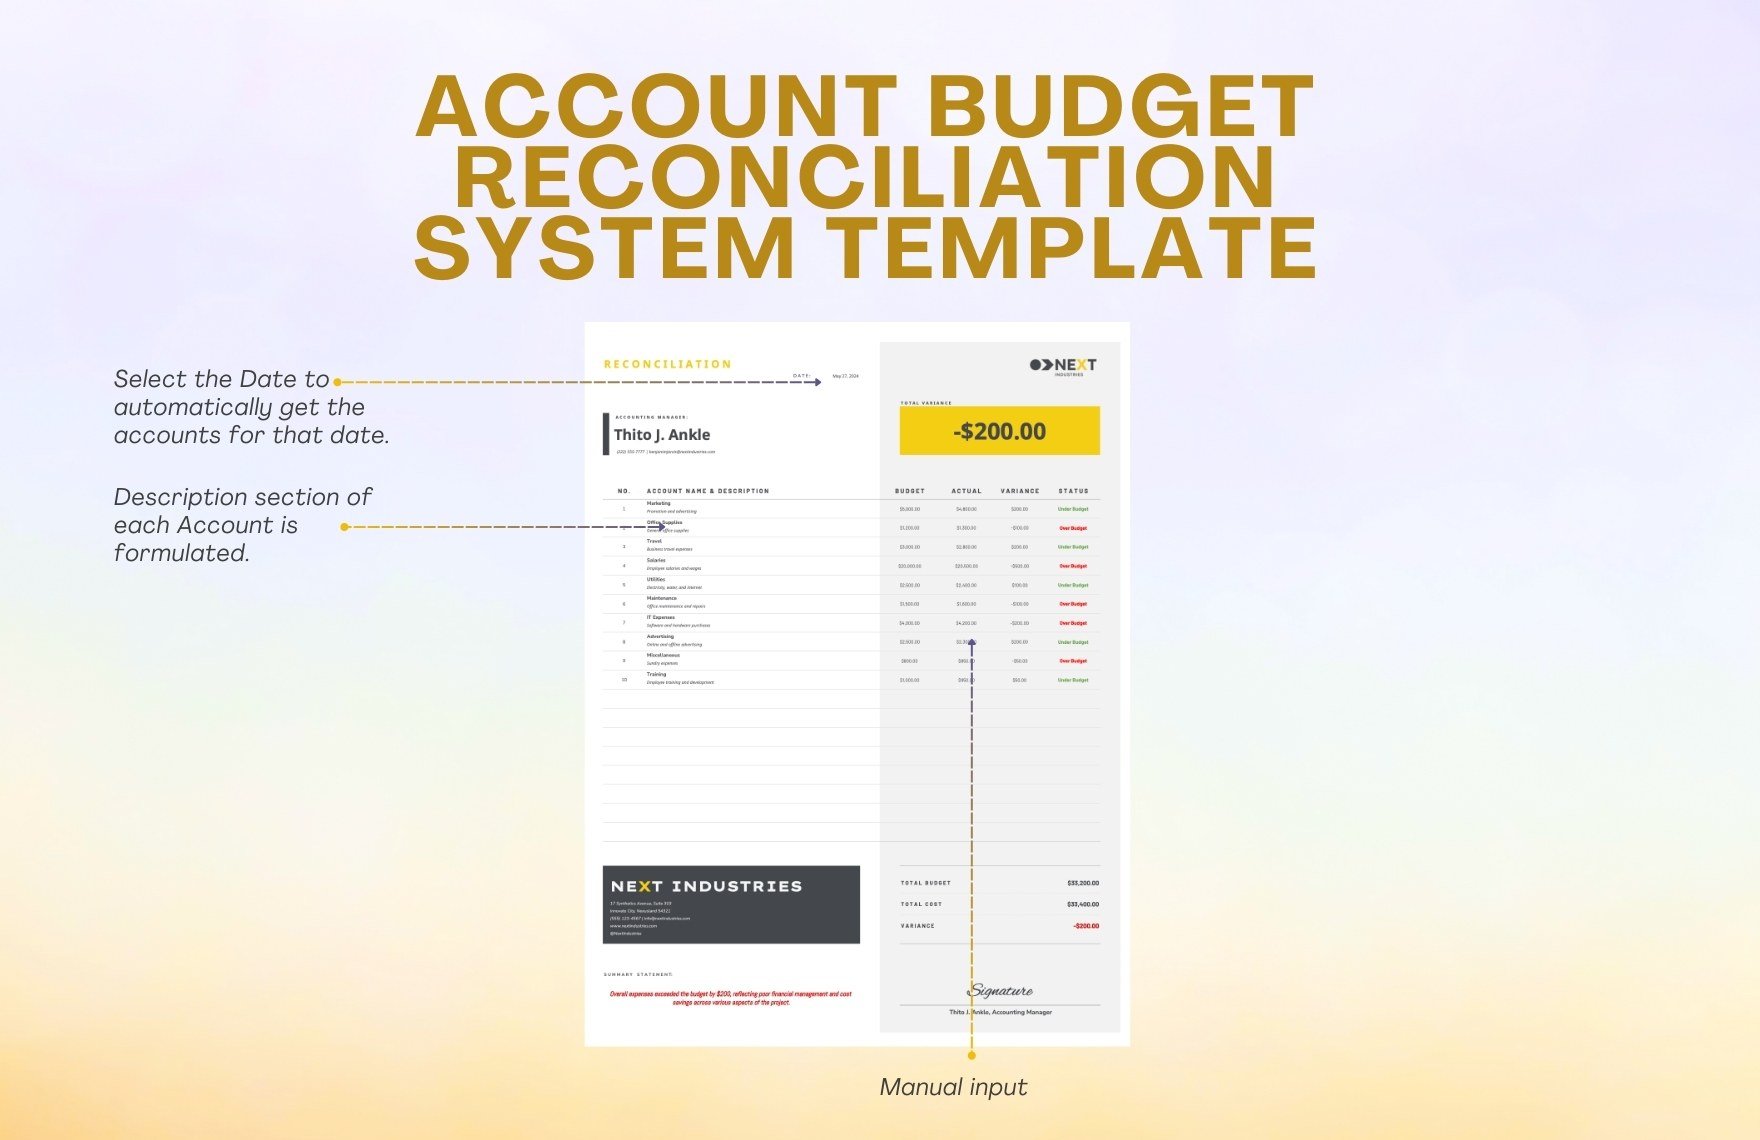 Account Budget Reconciliation System Template